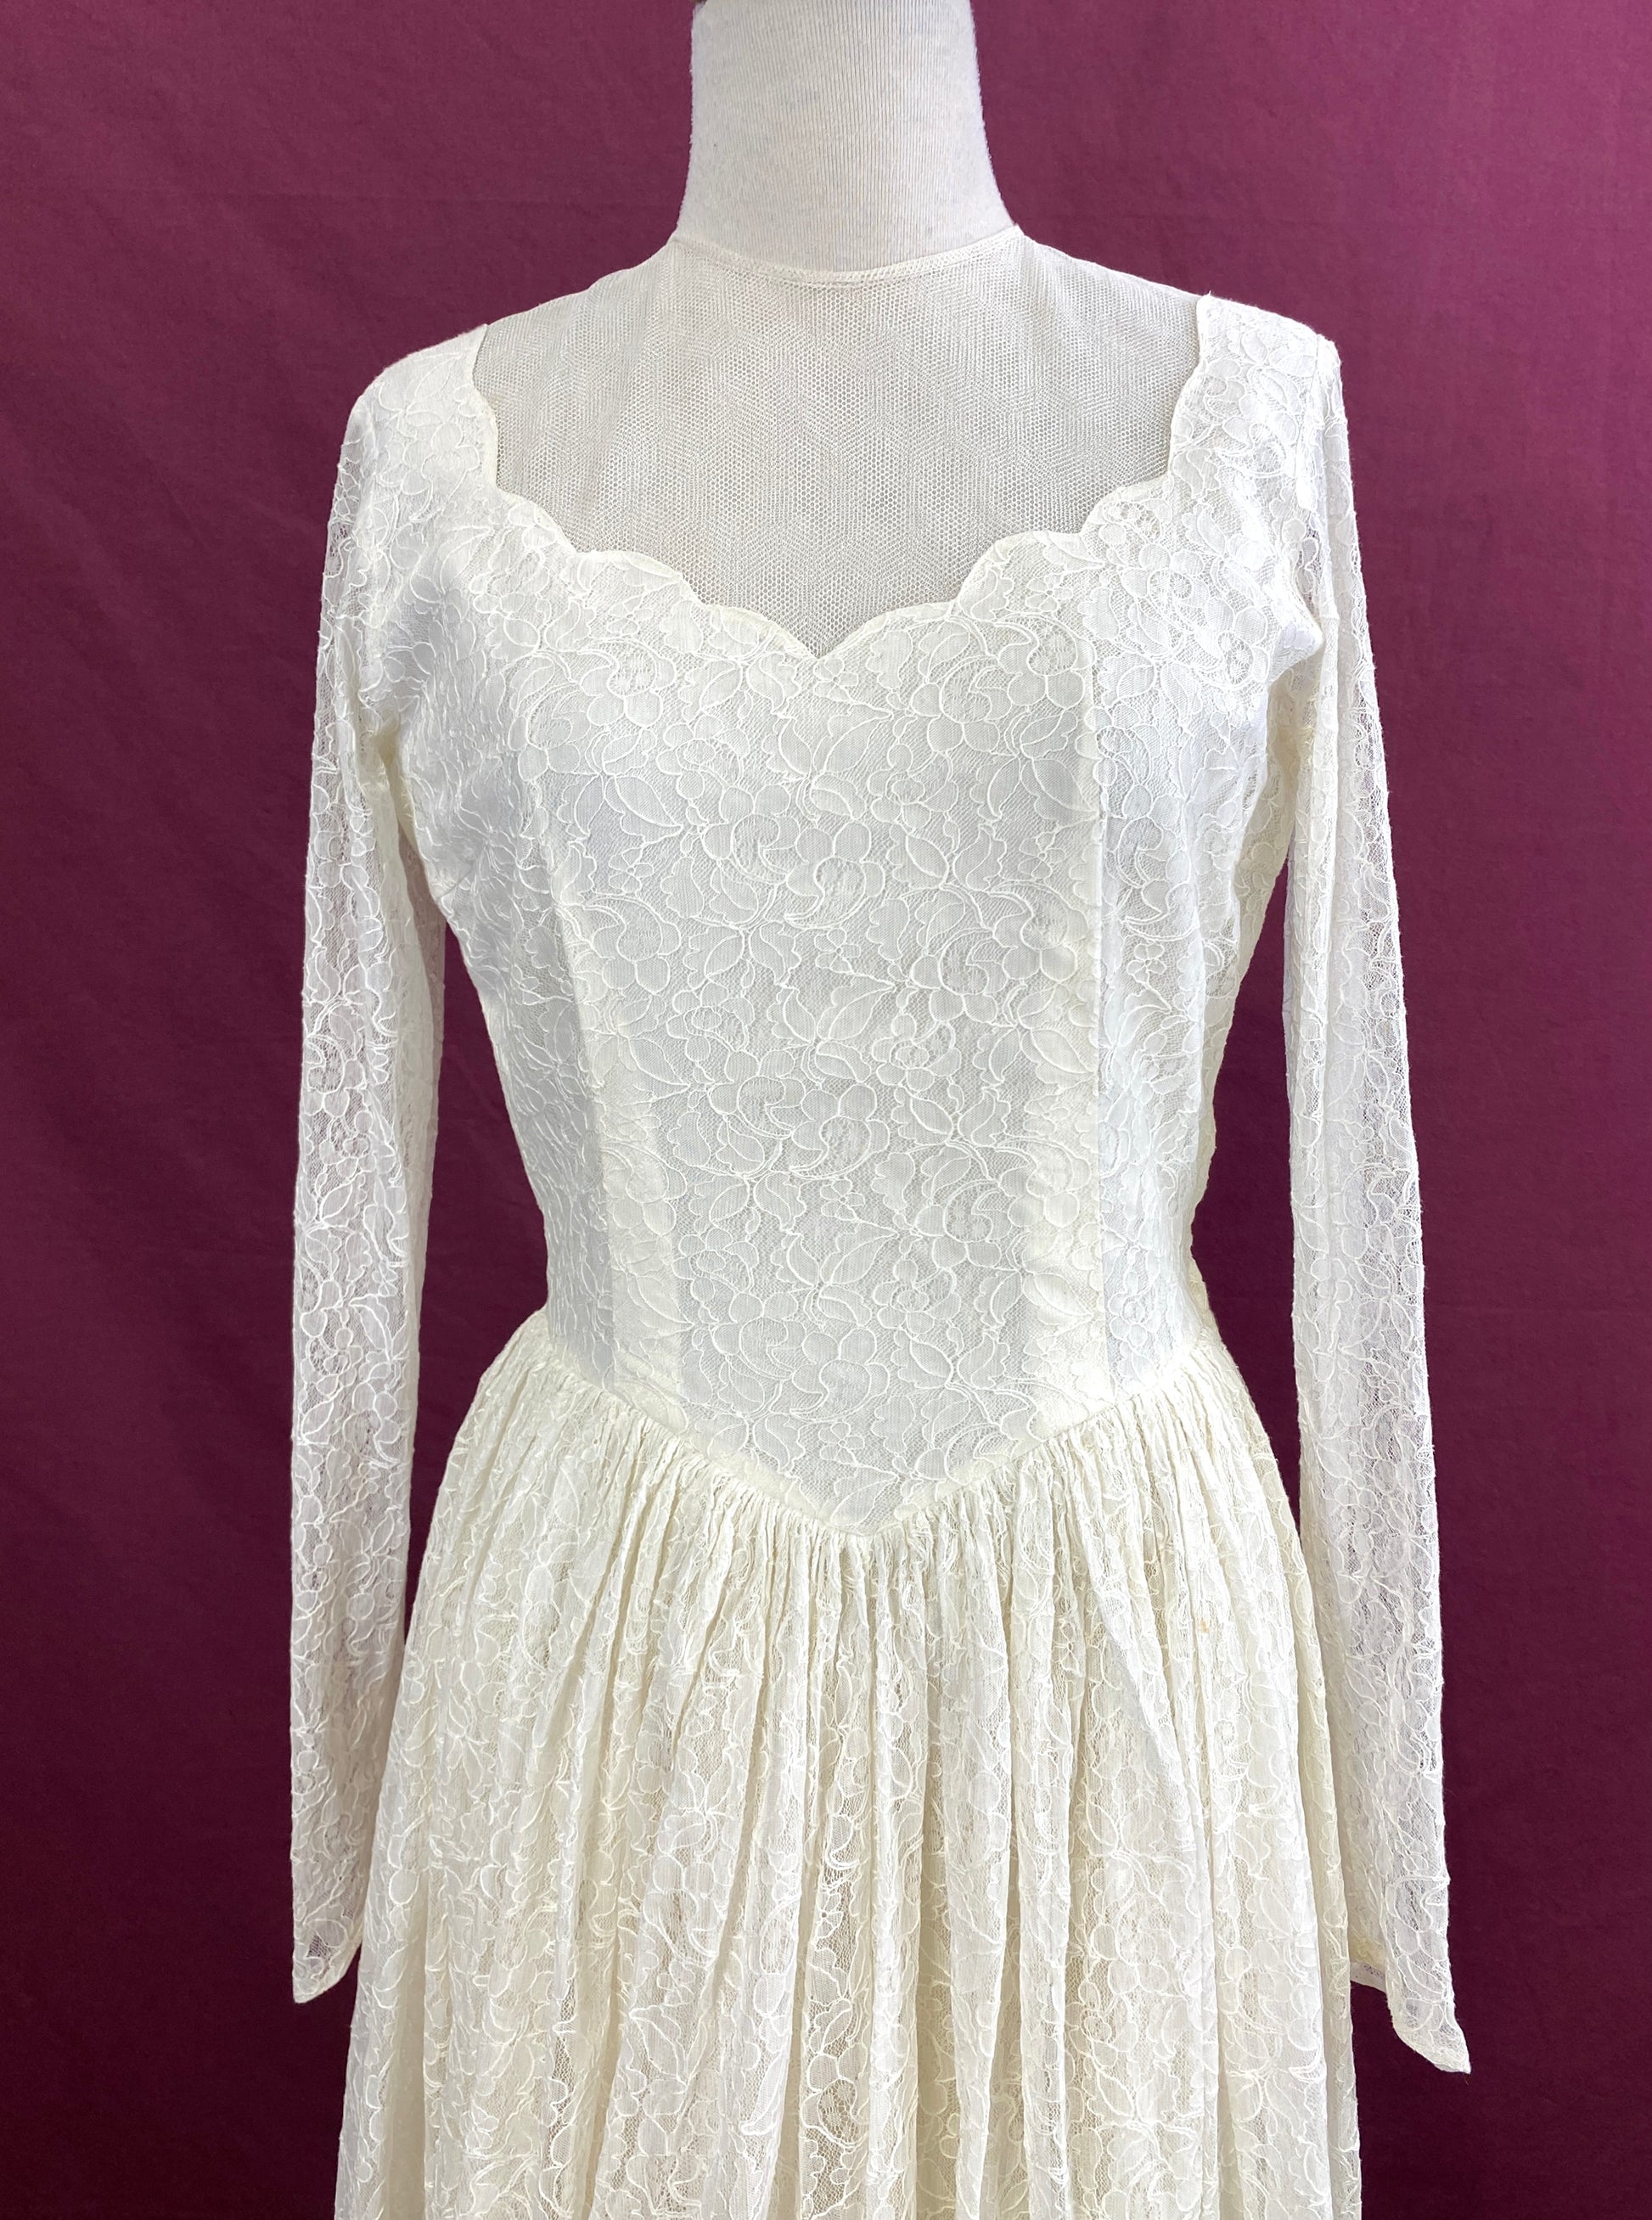 Vintage 50s Empire Waist WOW Lace 1950s White Wedding Dress Gown 